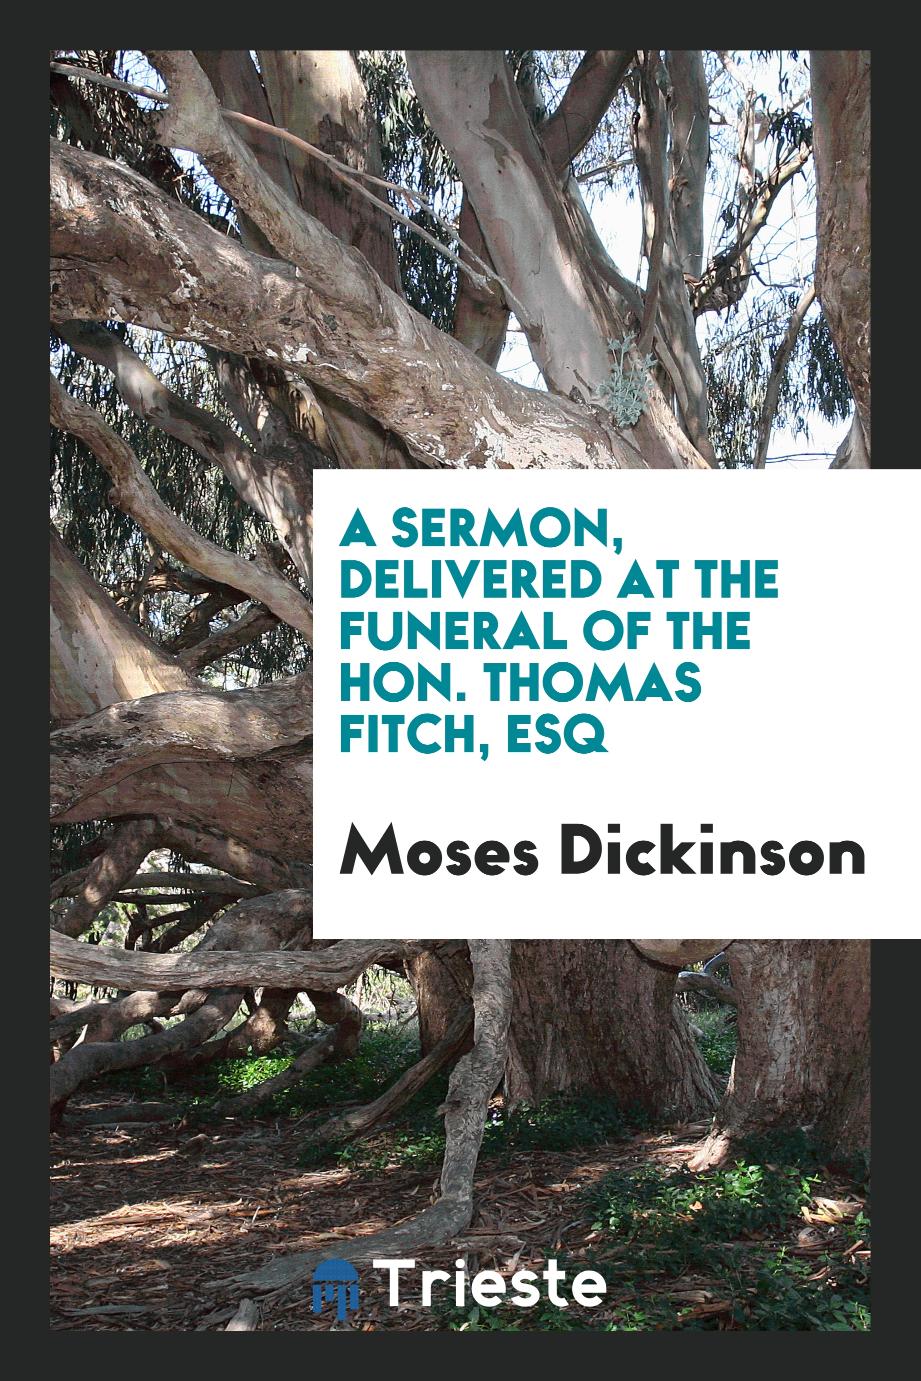 Moses Dickinson - A Sermon, Delivered at the Funeral of the Hon. Thomas Fitch, Esq